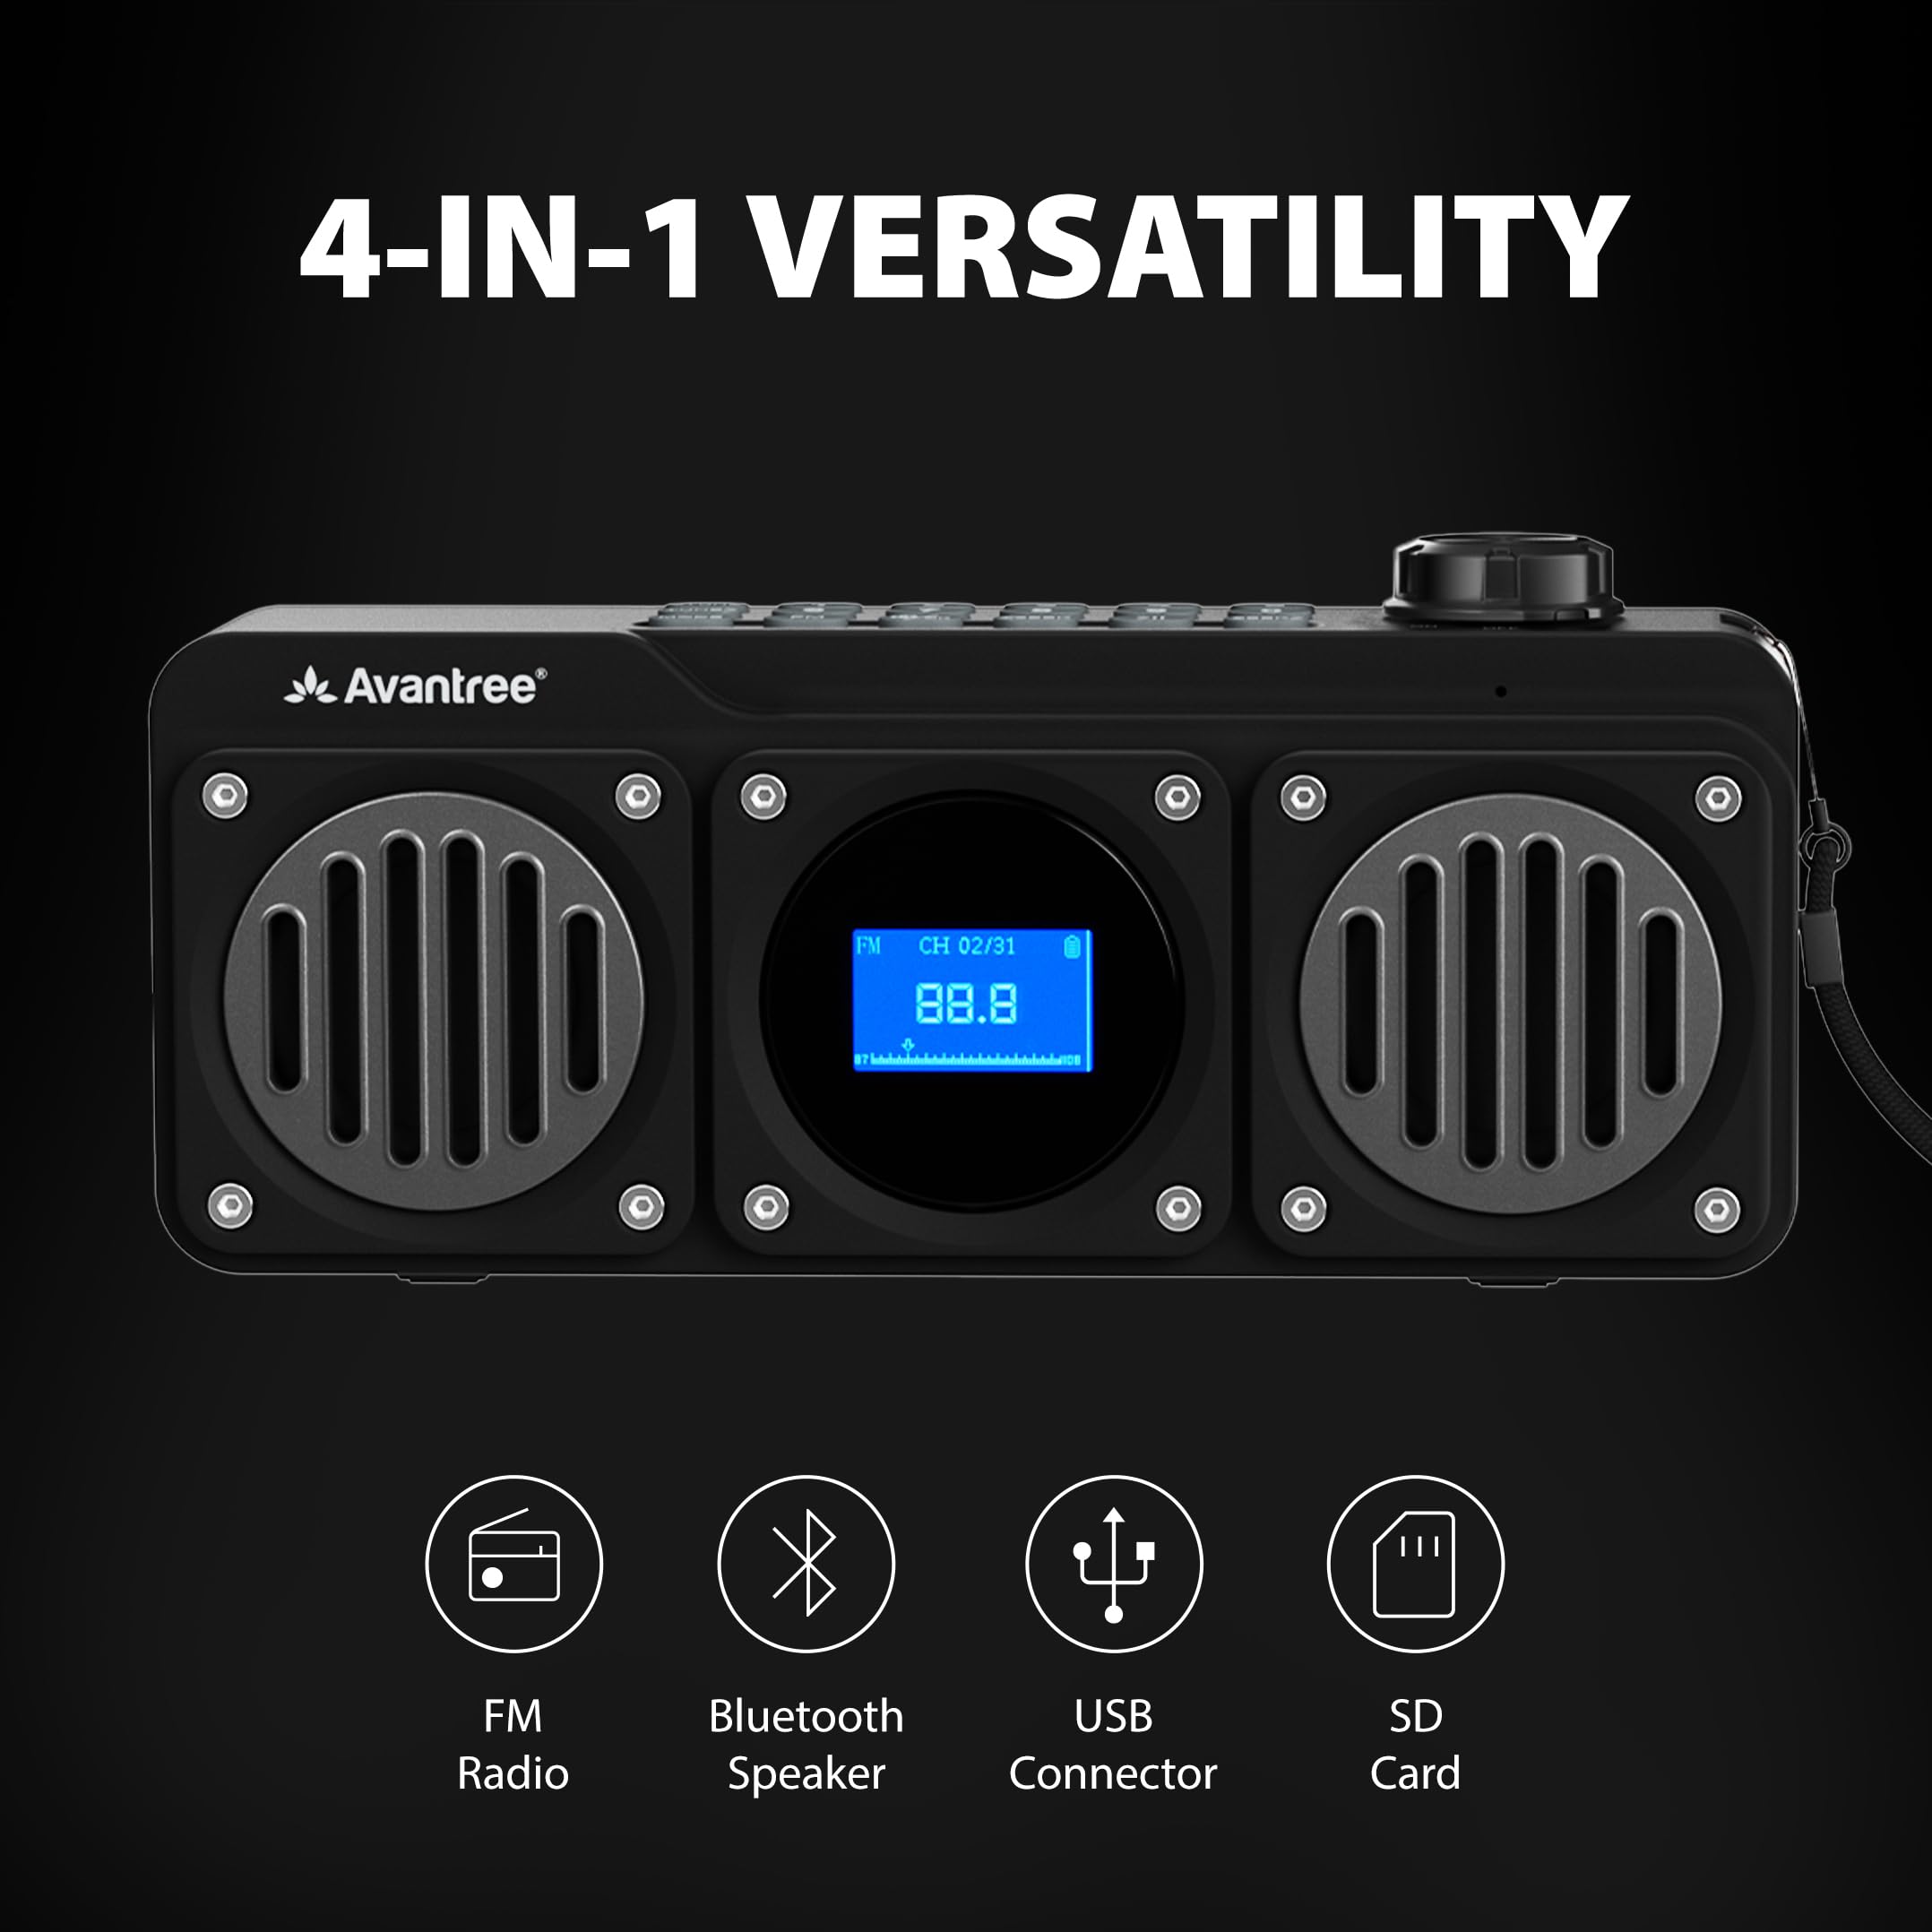 Avantree Boombyte - Portable Digital FM Radio with Bluetooth Speaker, Superb Sound, Metal Finish, MP3 Player, Support Micro SD Card & USB Audio Input, Long Play Time, Rechargeable, Easy to Use.